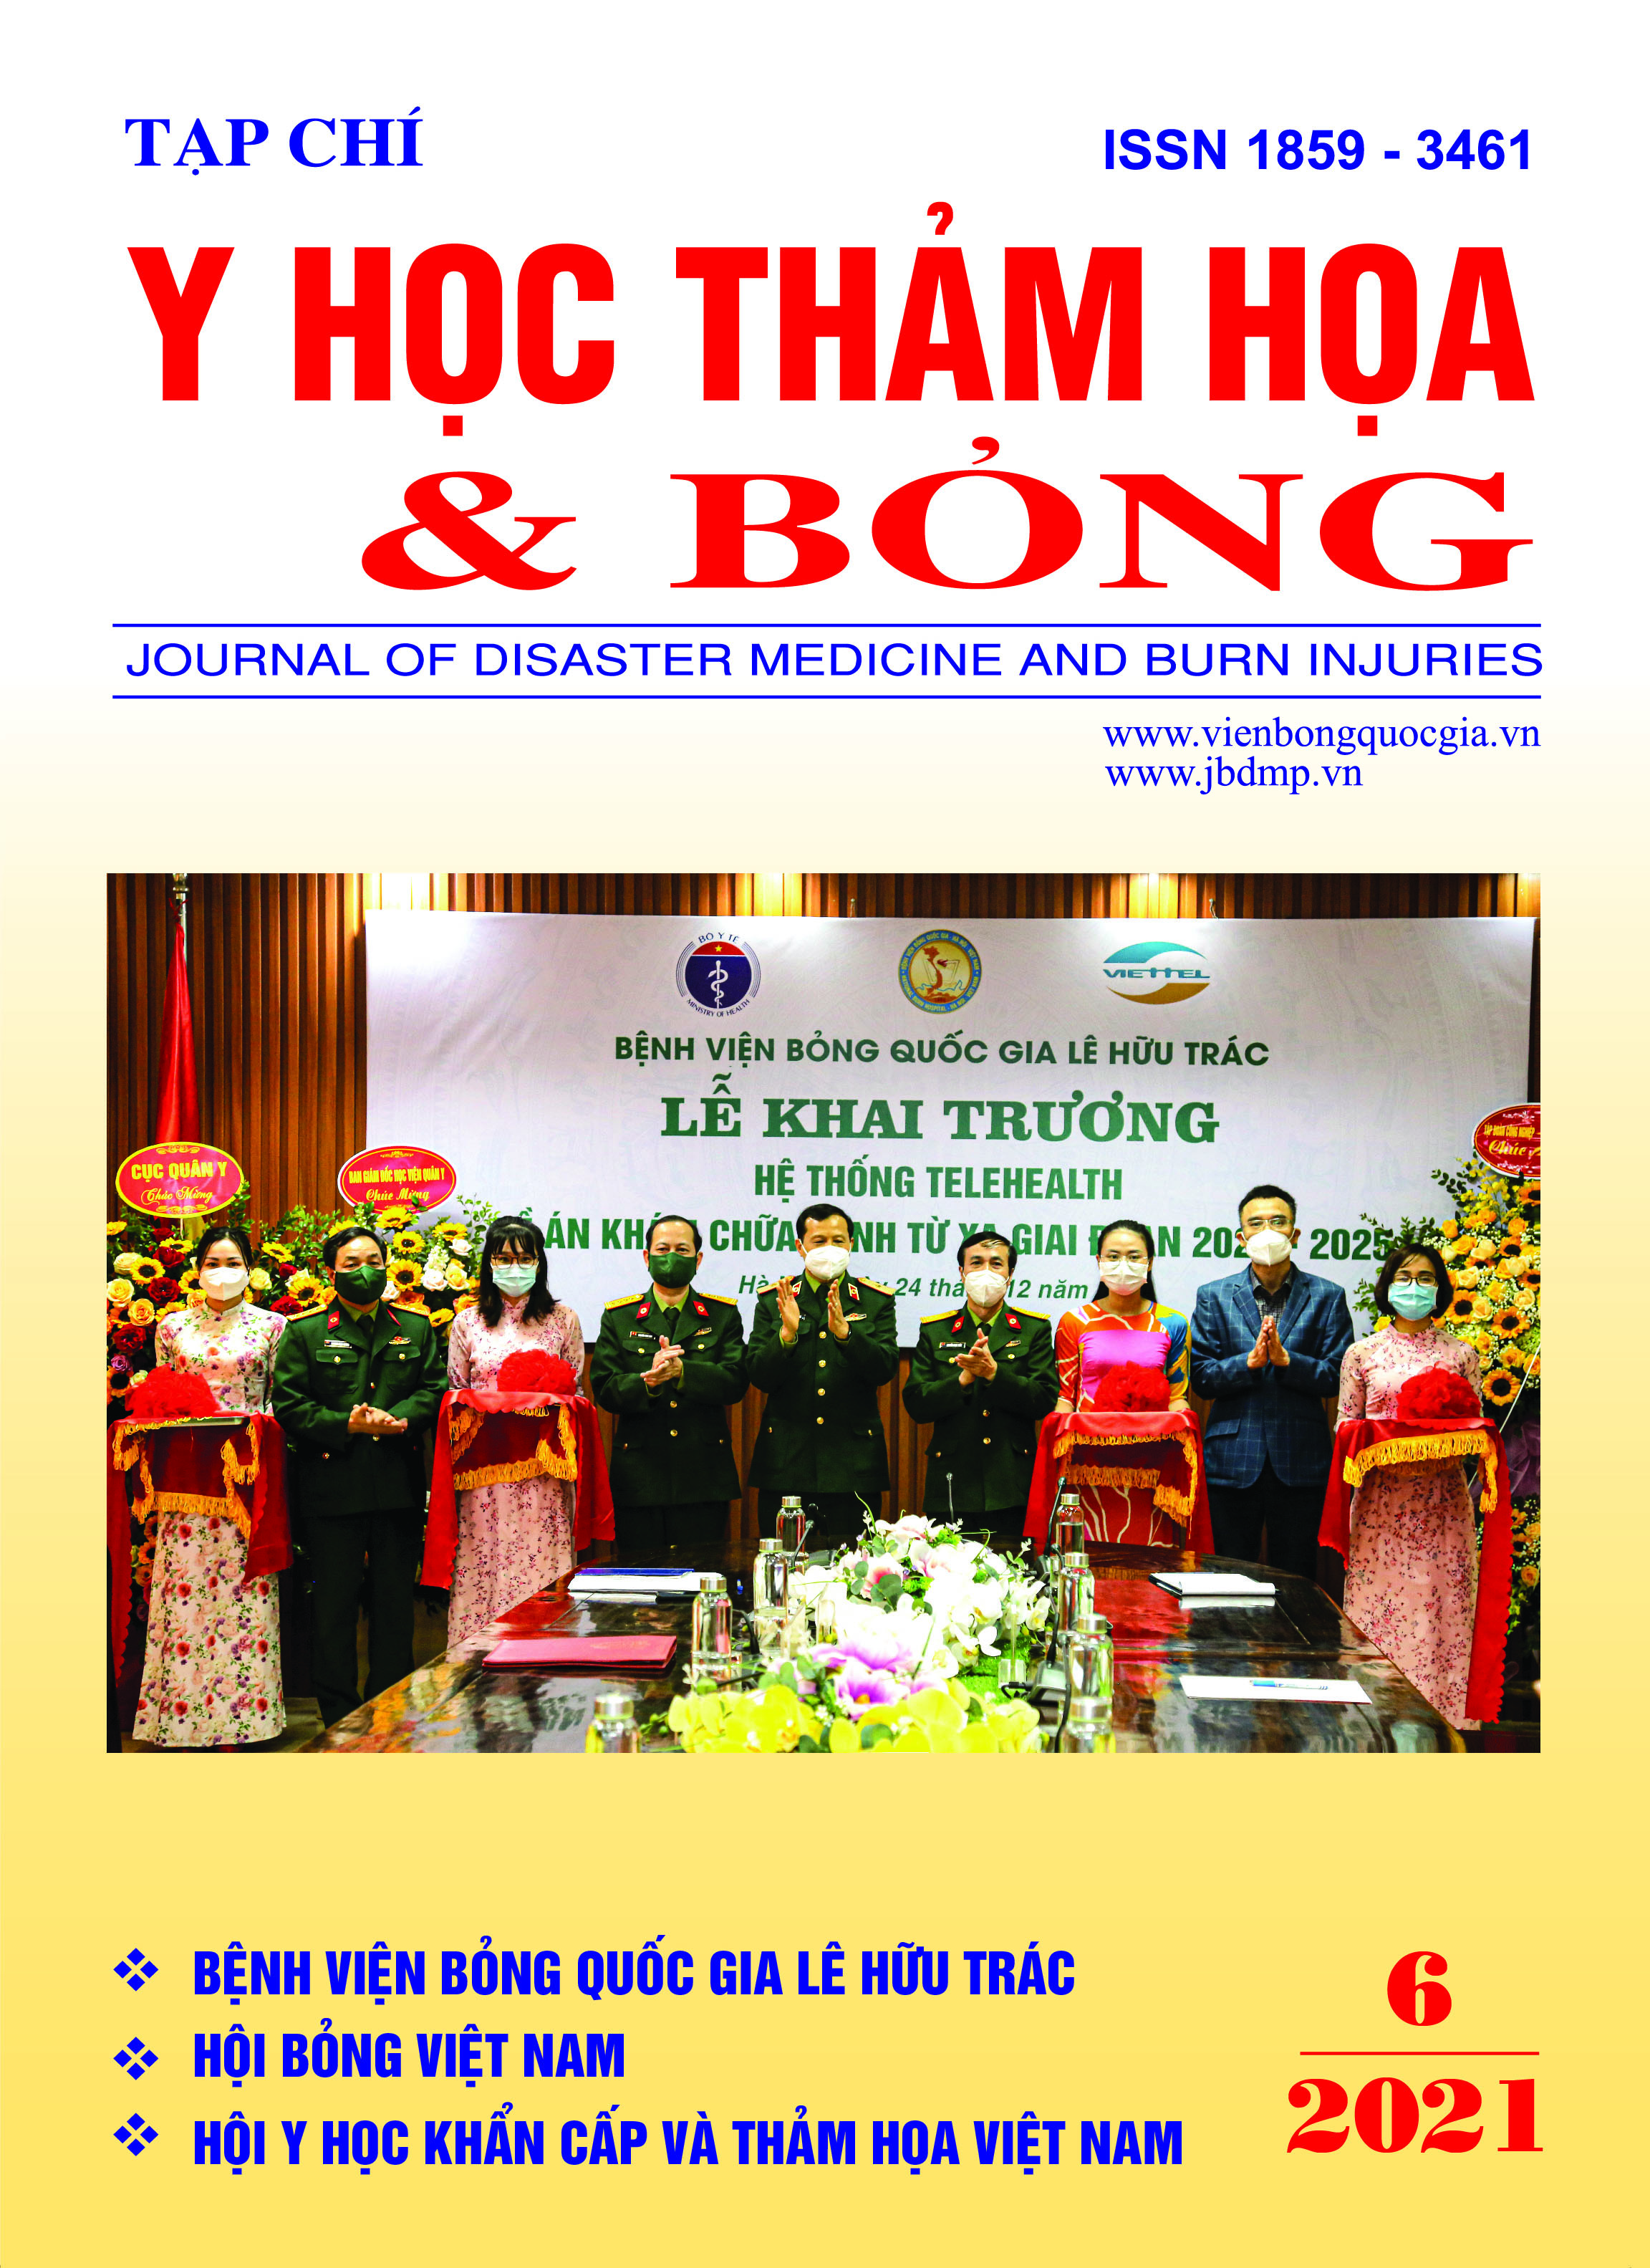 Major General, Prof. Dr. Hoang Van Luong, Deputy Director of the Military Medical University and the Hospital's Board of Directors cut the ribbon to launch the telehealth system of the project of remote medical examination and treatment project for the period of 2020-2025, on December 24, 2021.